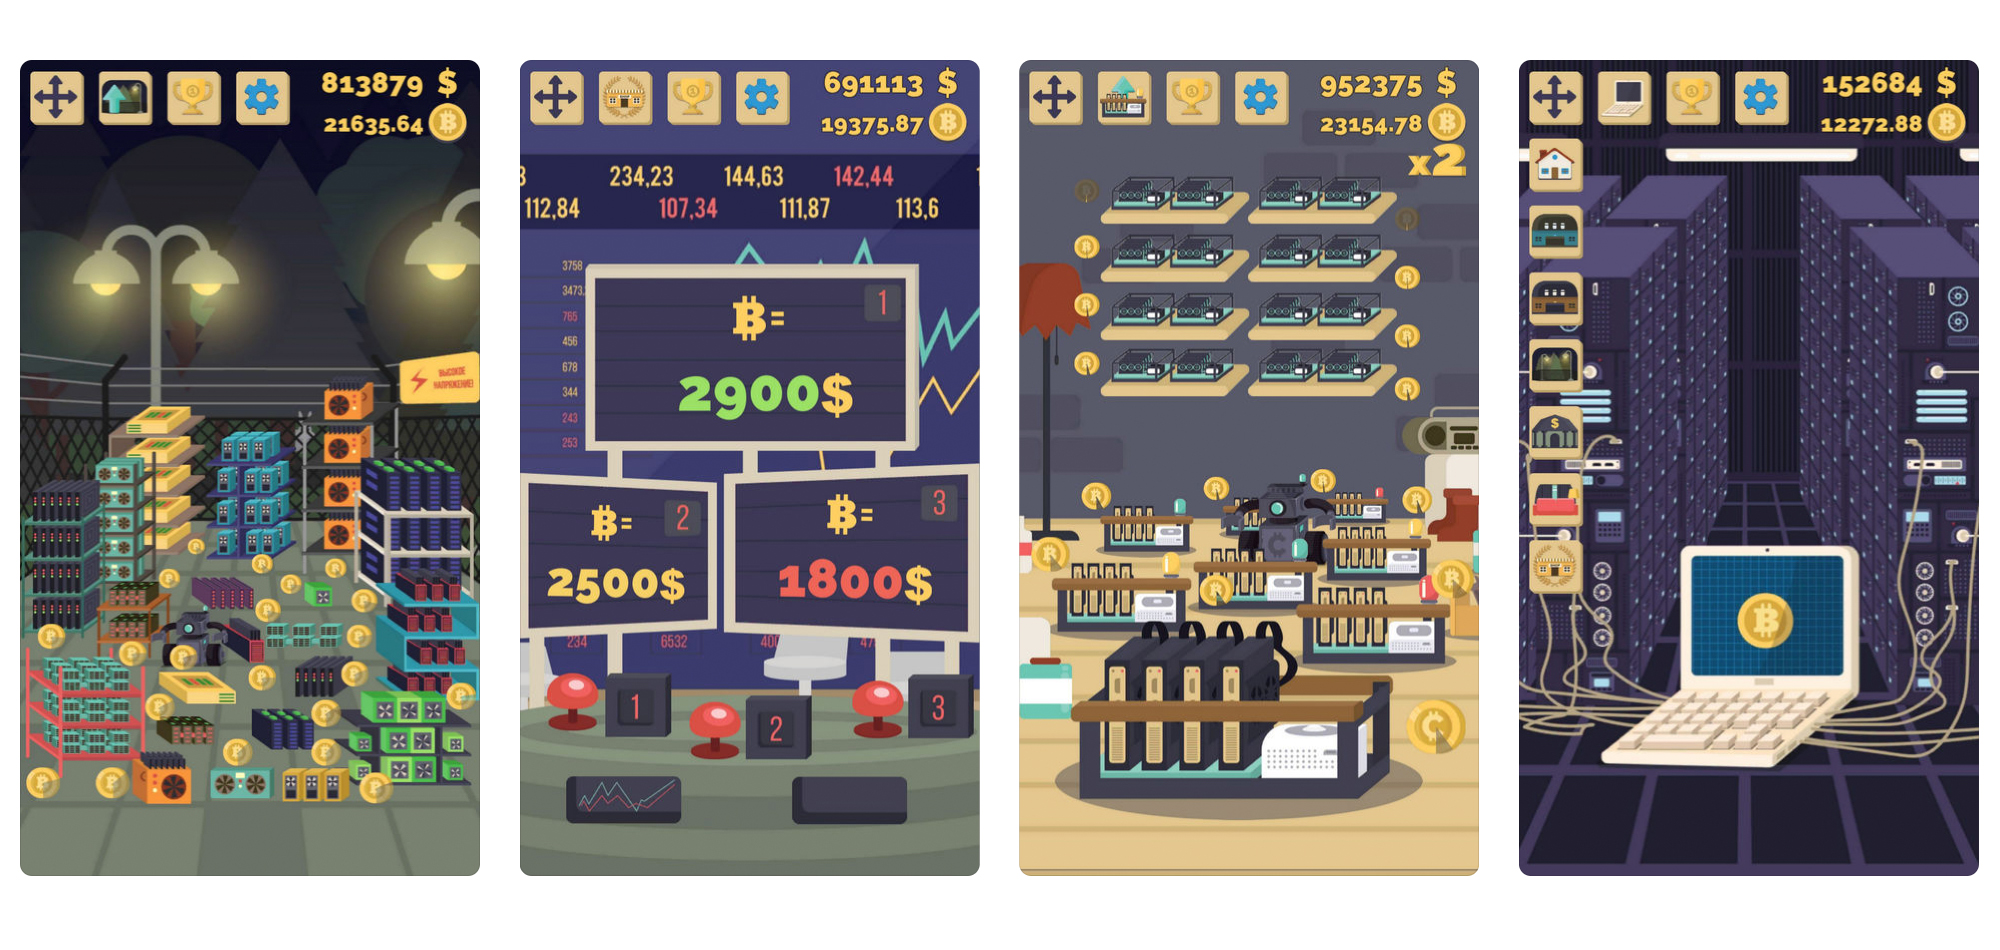 Cryptocurrency Games Have Invaded the Most Popular App Stores